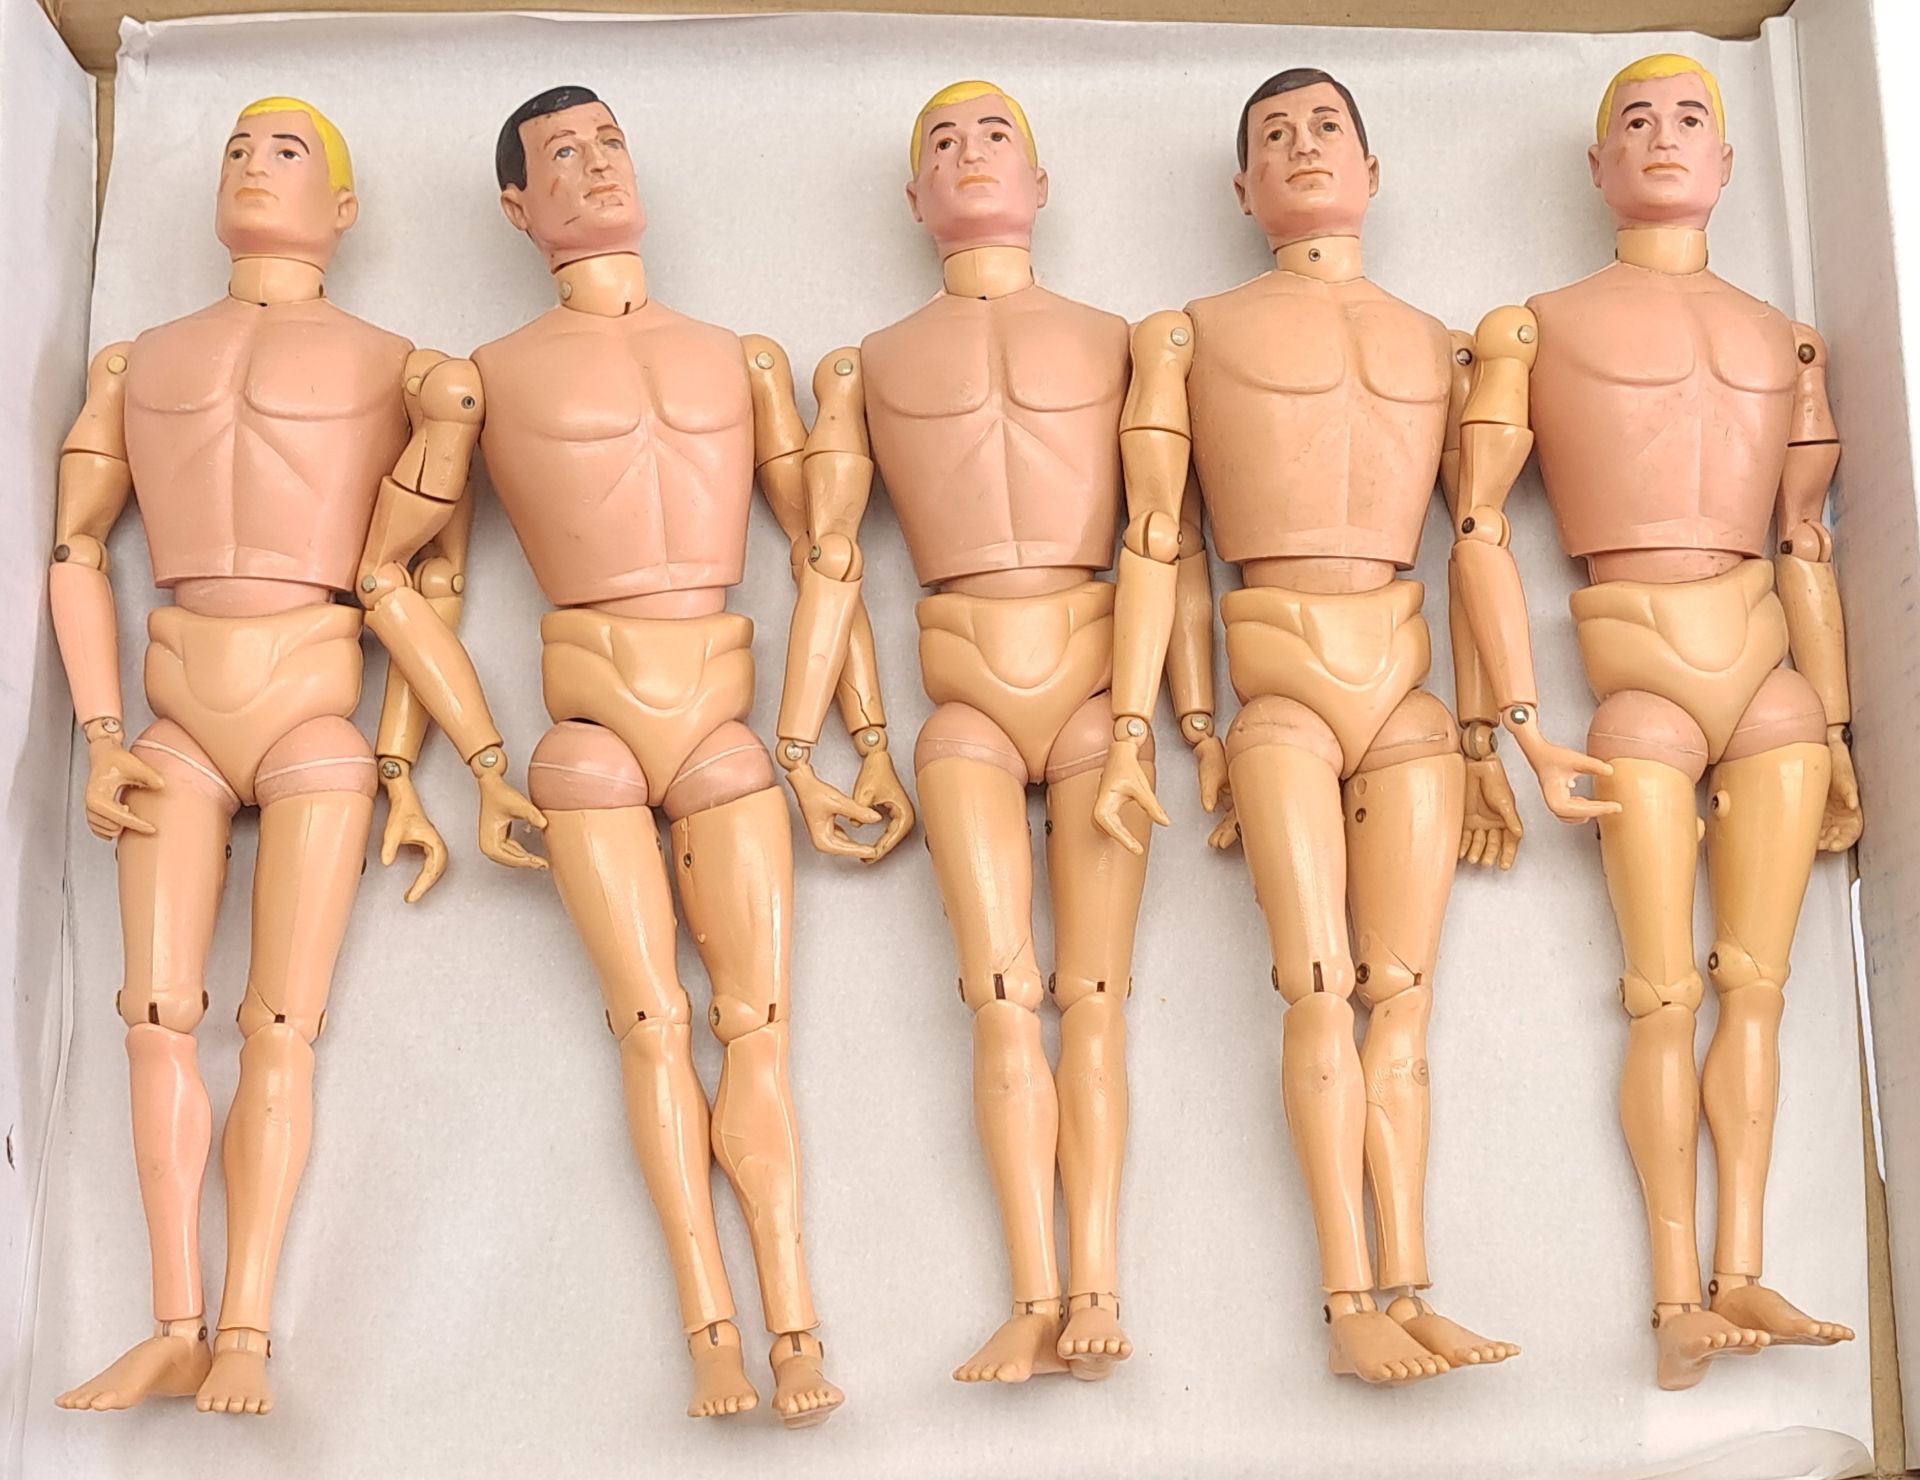 Palitoy Action Man vintage painted head figures/loose/undressed, a group which appear to be gener...